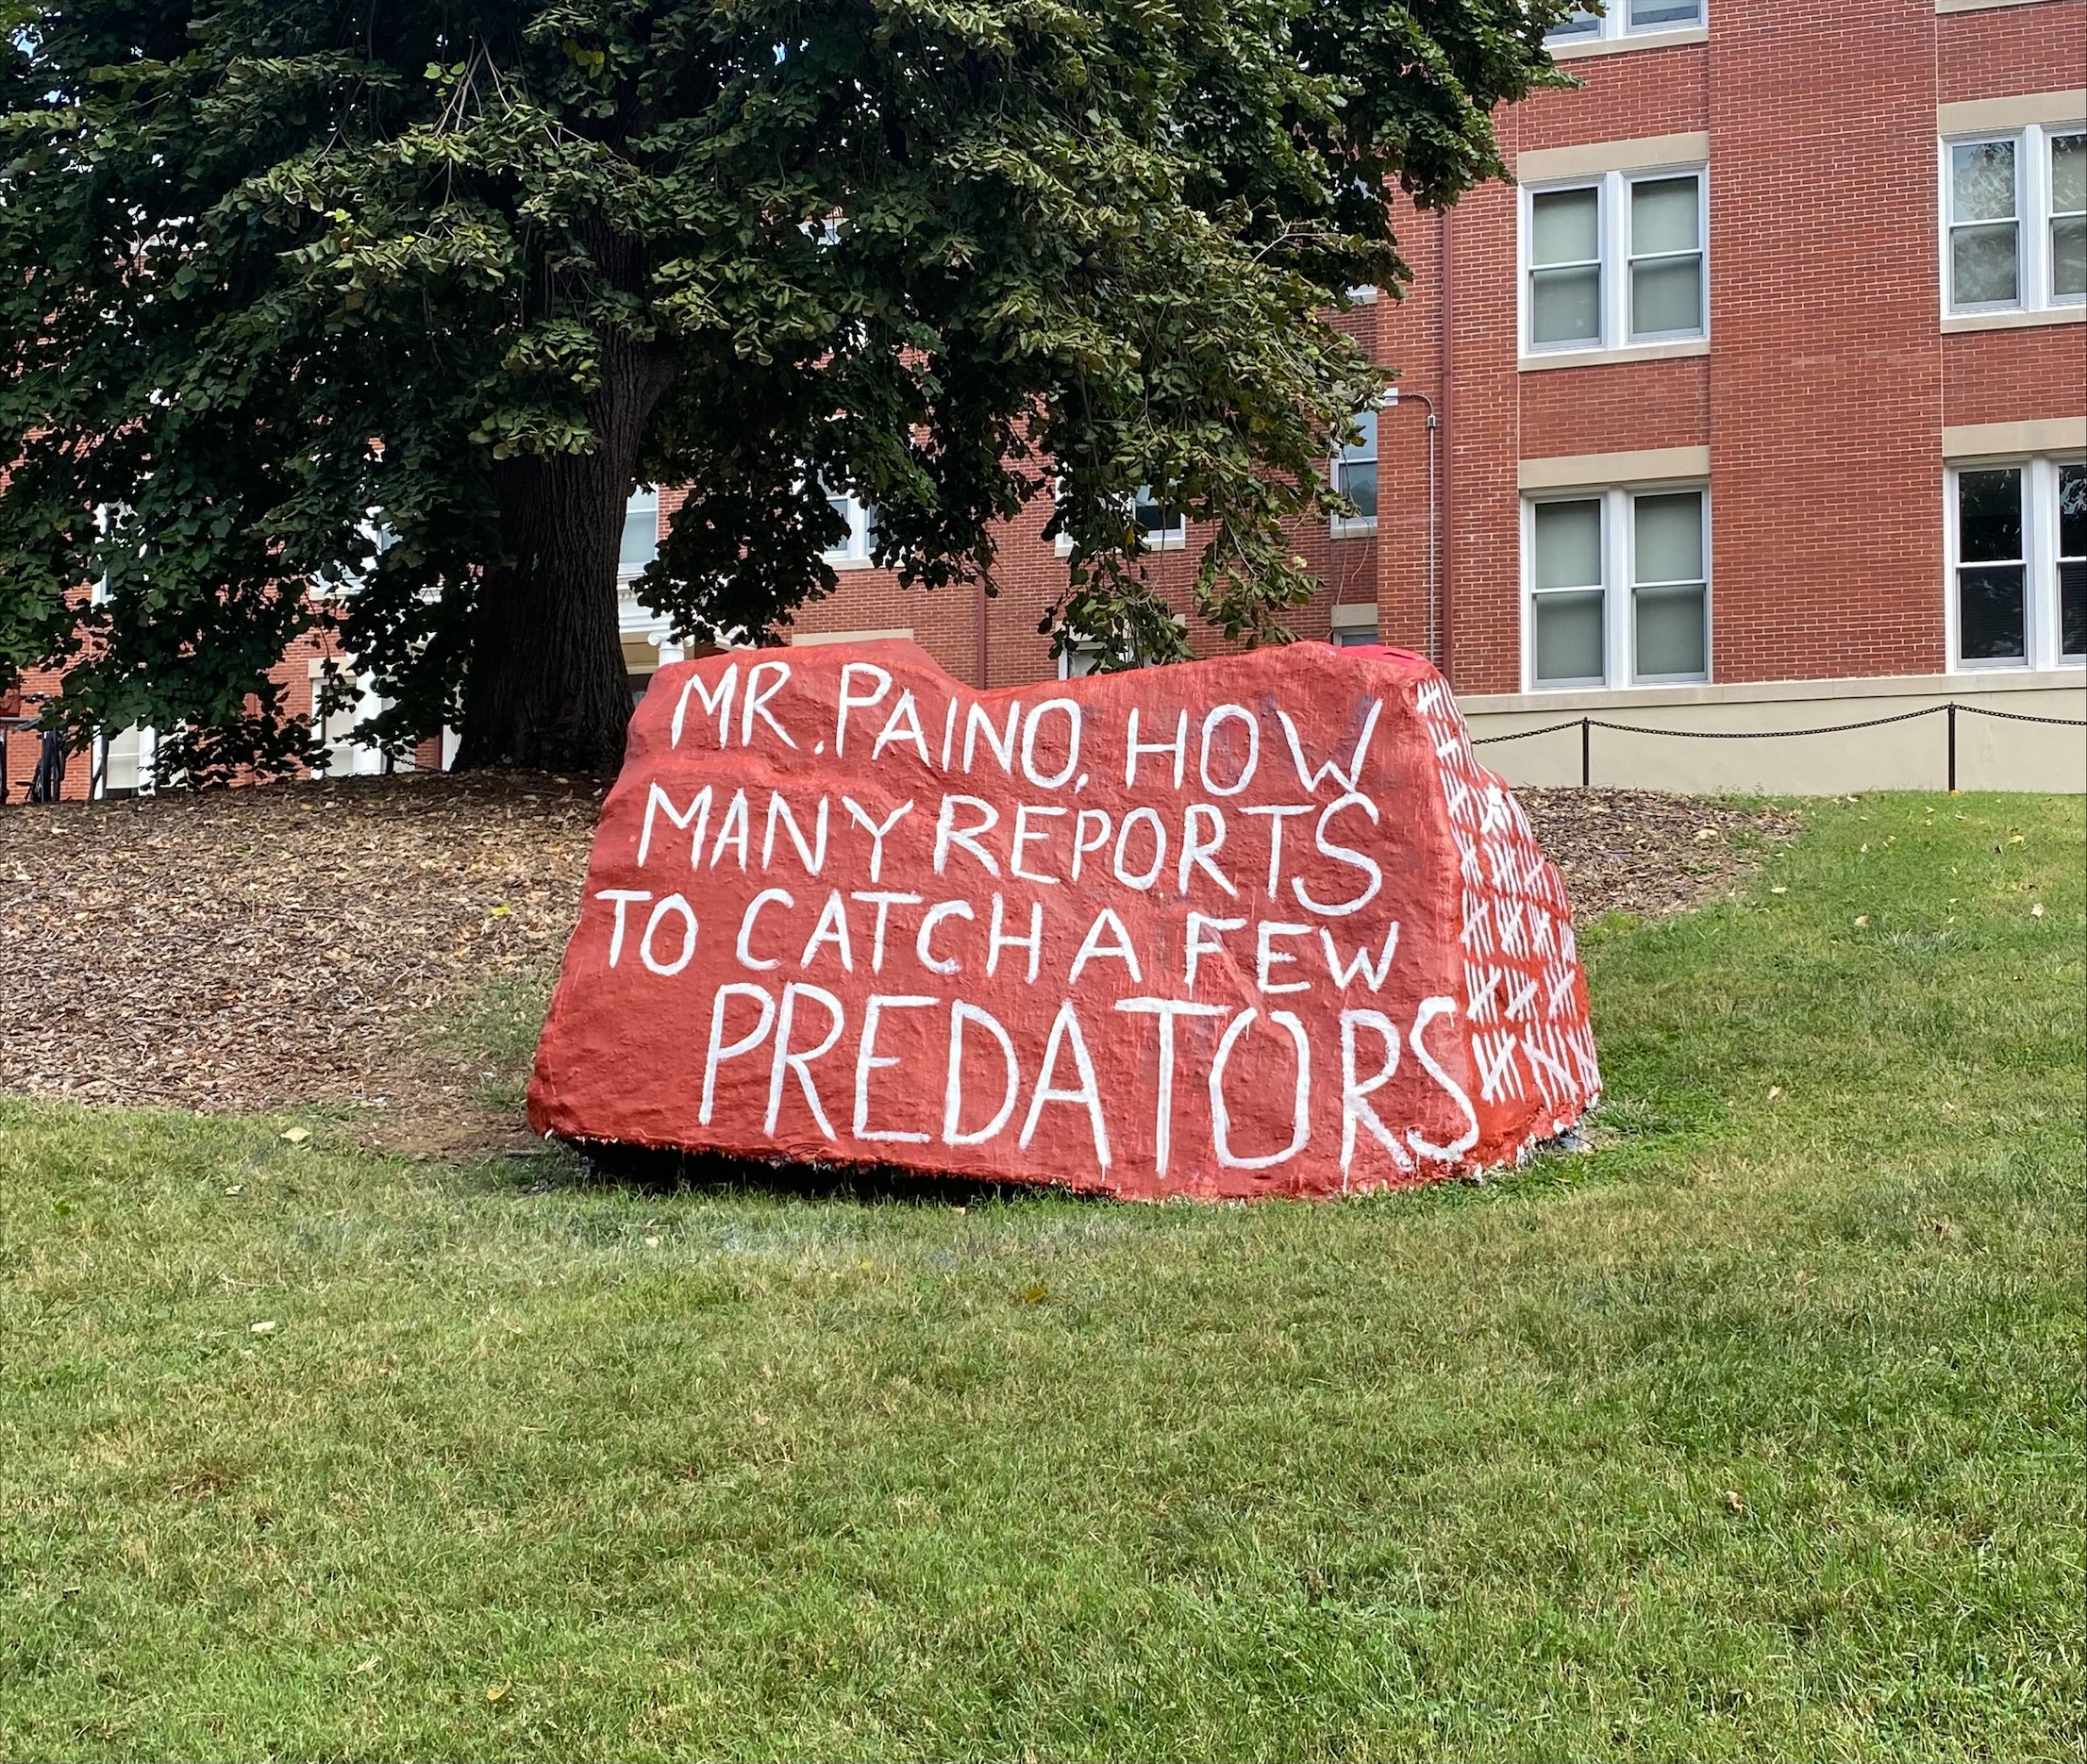 Recent rock painting calls attention to safety concerns involving harassment and predatory behavior